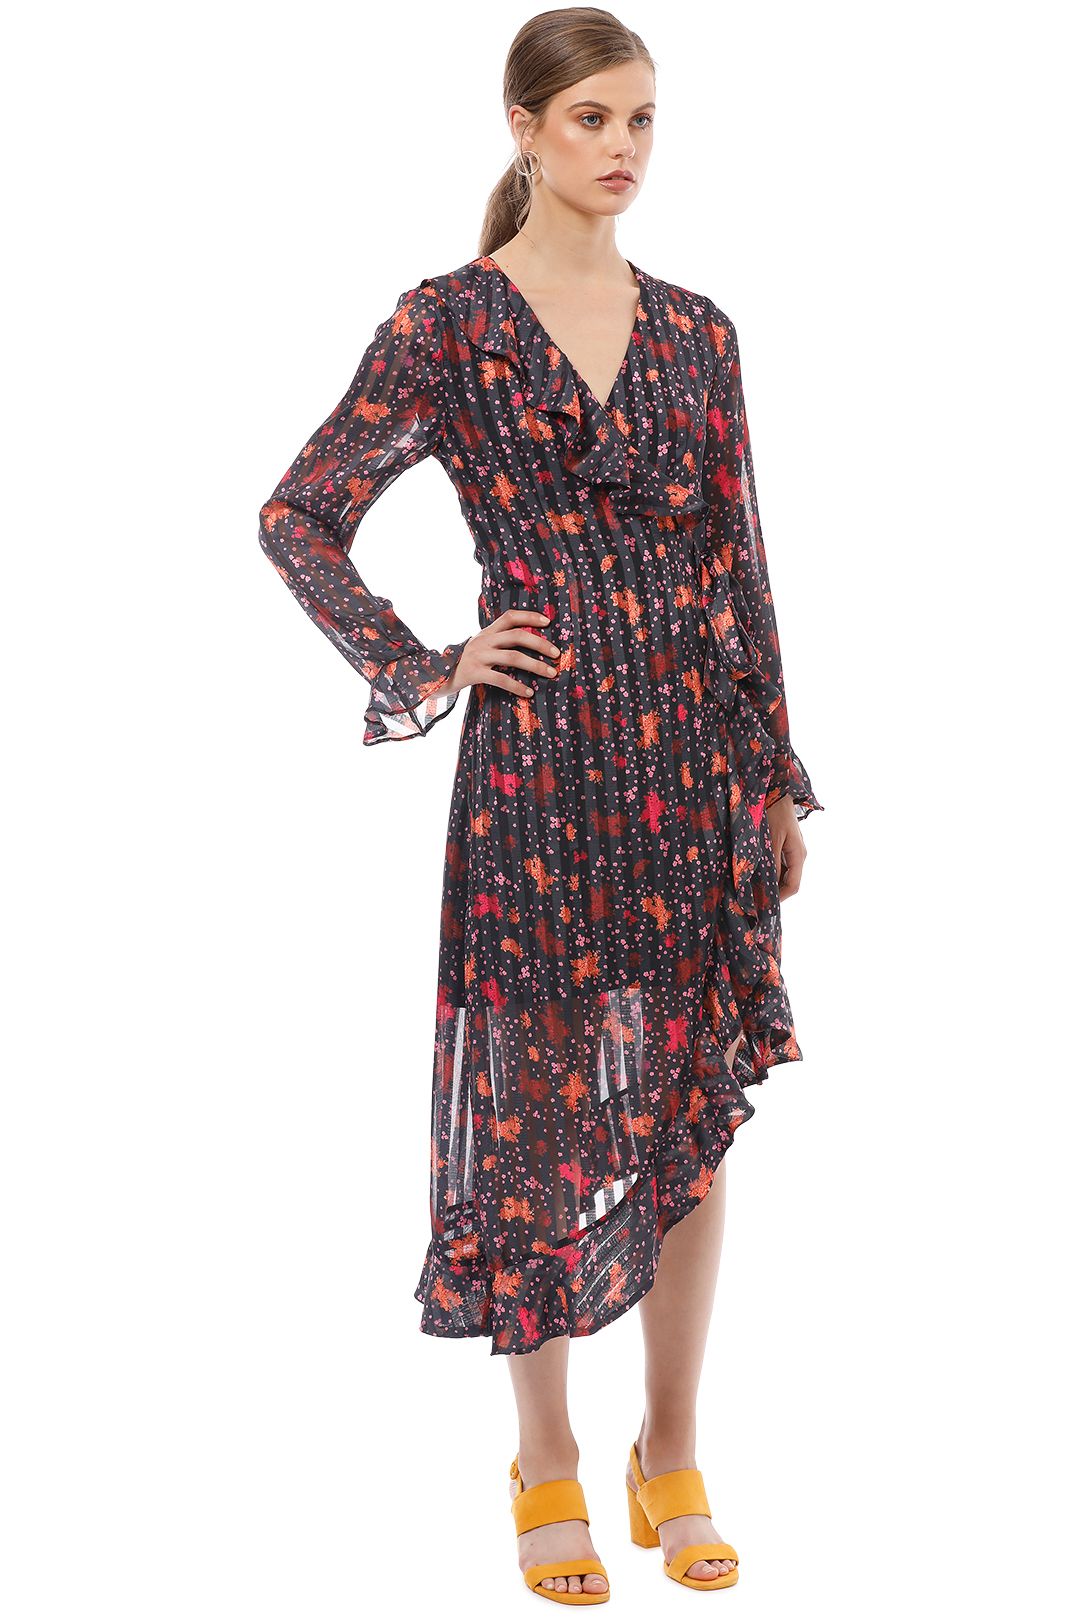 CMEO Collective - Significant Midi Dress - Black Floral - Side